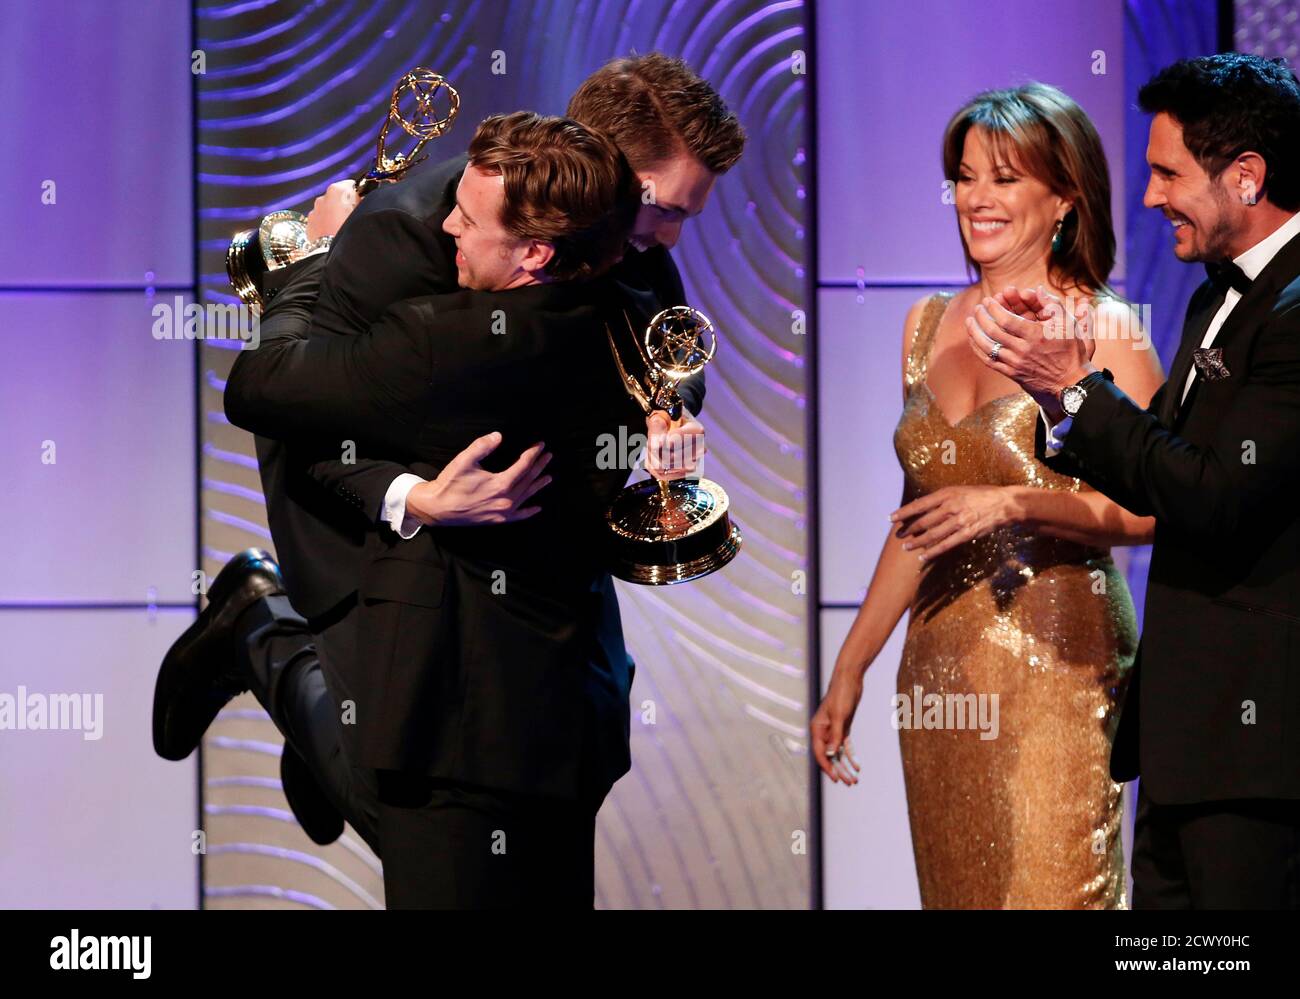 Scott Clifton from 'The Bold and the Beautiful' jumps into the arms of Billy Miller from 'The Young and the Restless' as they both celebrate winning the outstanding supporting actor in a drama series award as presenters Nancy Lee Grahn and Don Diamont (L-R) look on during the 40th annual Daytime Emmy Awards in Beverly Hills, California June 16, 2013. REUTERS/Danny Moloshok (UNITED STATES - Tags: ENTERTAINMENT TPX IMAGES OF THE DAY) Stock Photo